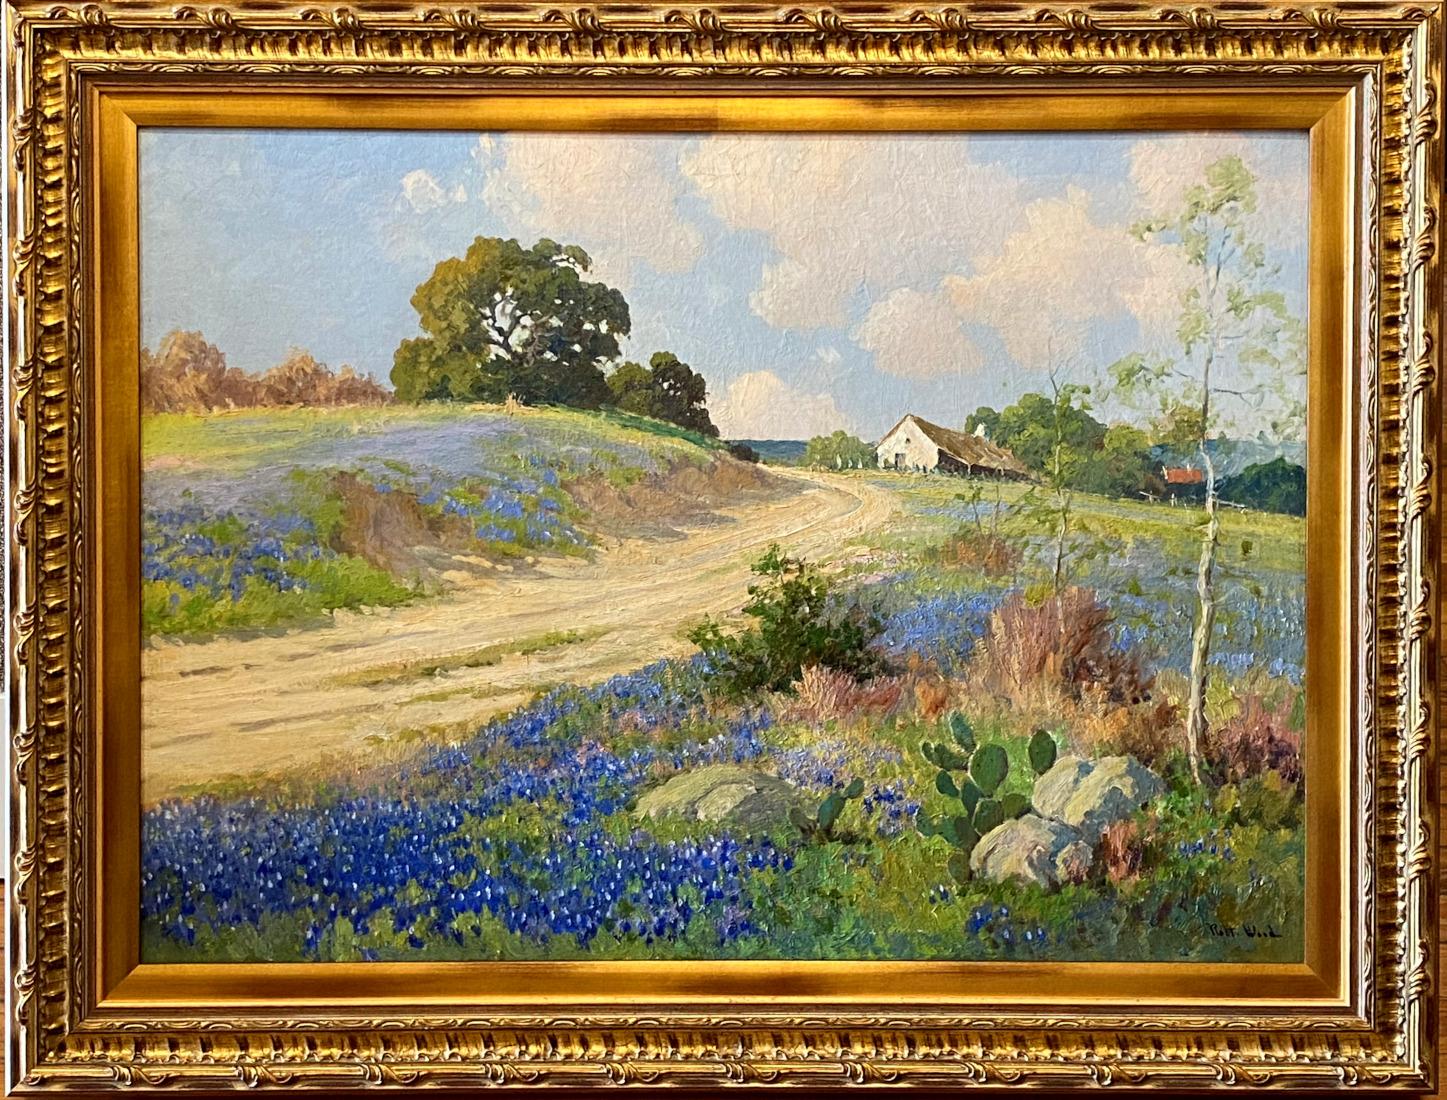 Robert William Wood Landscape Painting - "AROUND THE BEND" TEXAS HILL COUNTRY BLUEBONNET IMAGE SIZE 26 X 36 Circa 1940